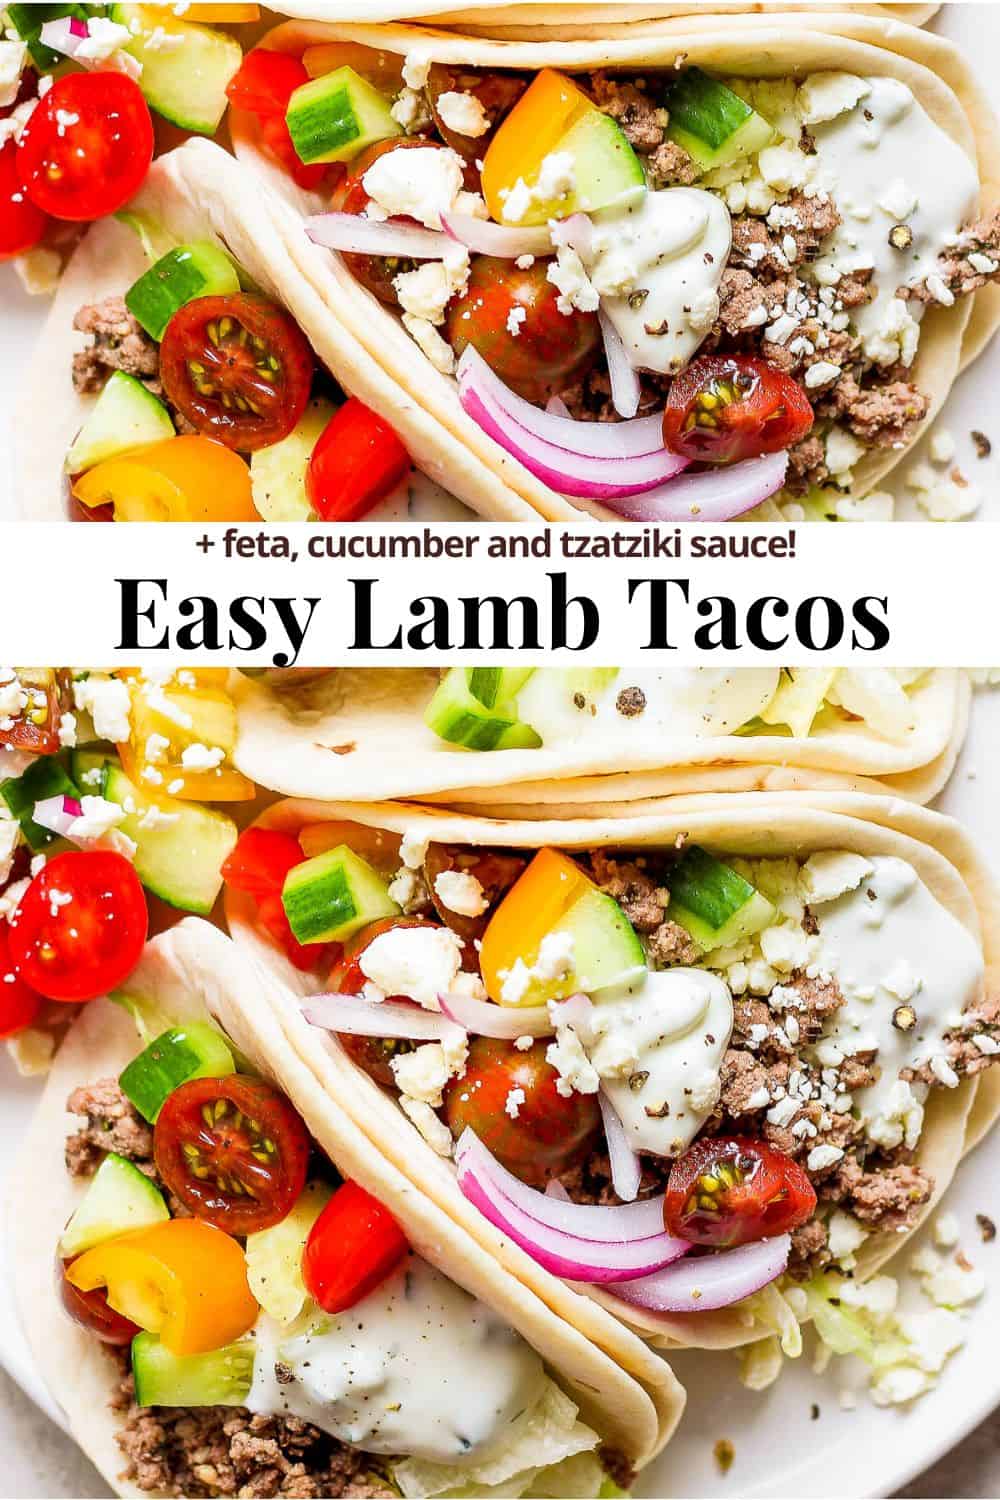 Pinterest image showing lamb tacos with the title "easy lamb tacos + feta, cucumber, and tzatziki sauce."